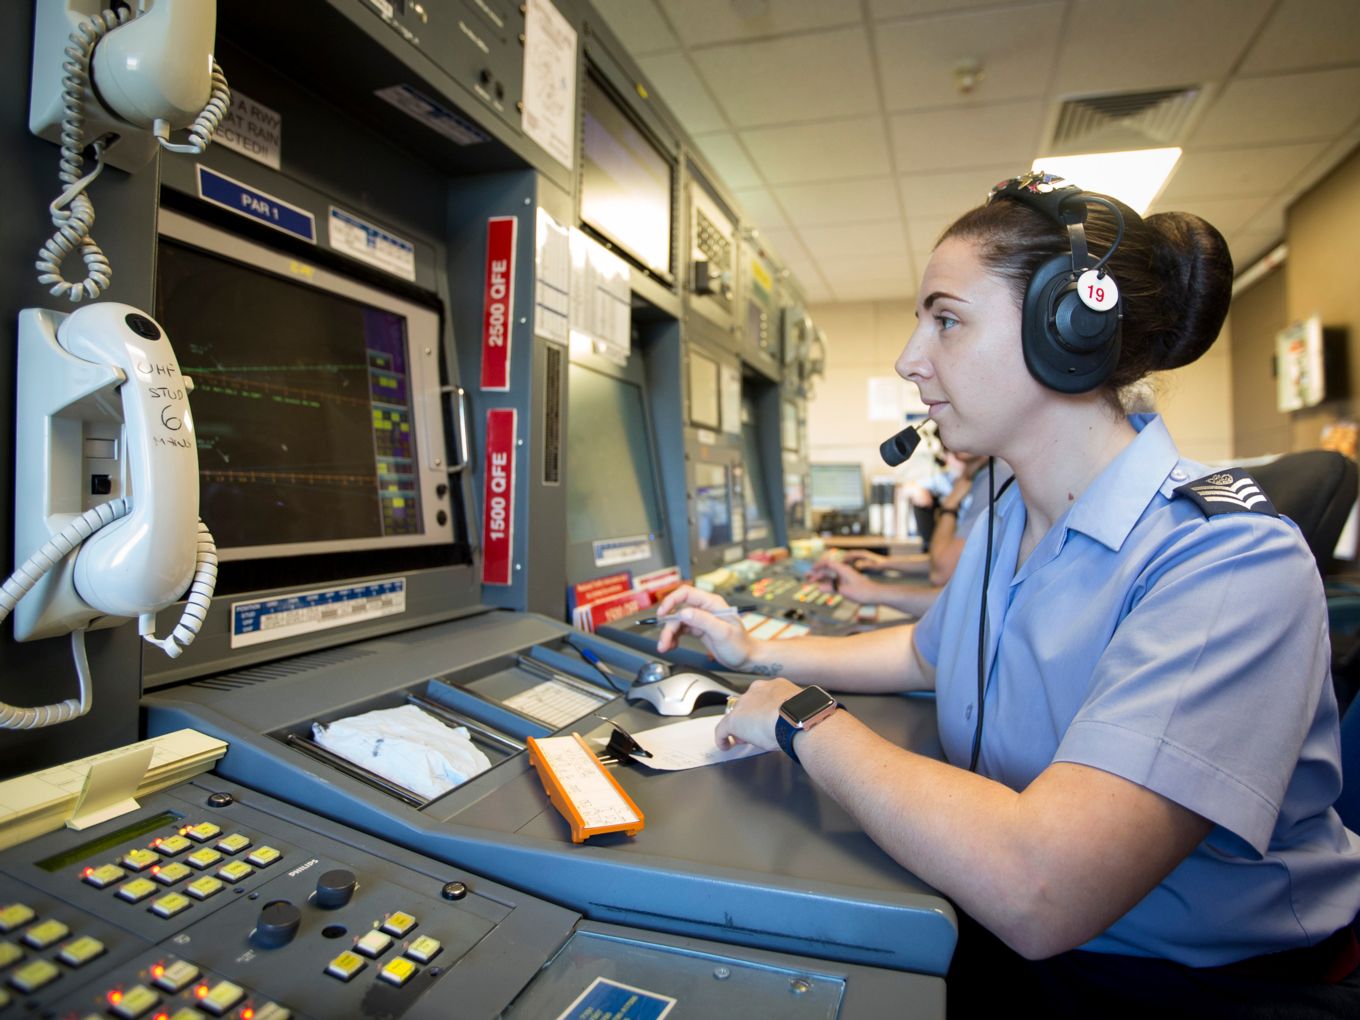 Flight Sergeant Katie Mason in the control room at RAF Wittering